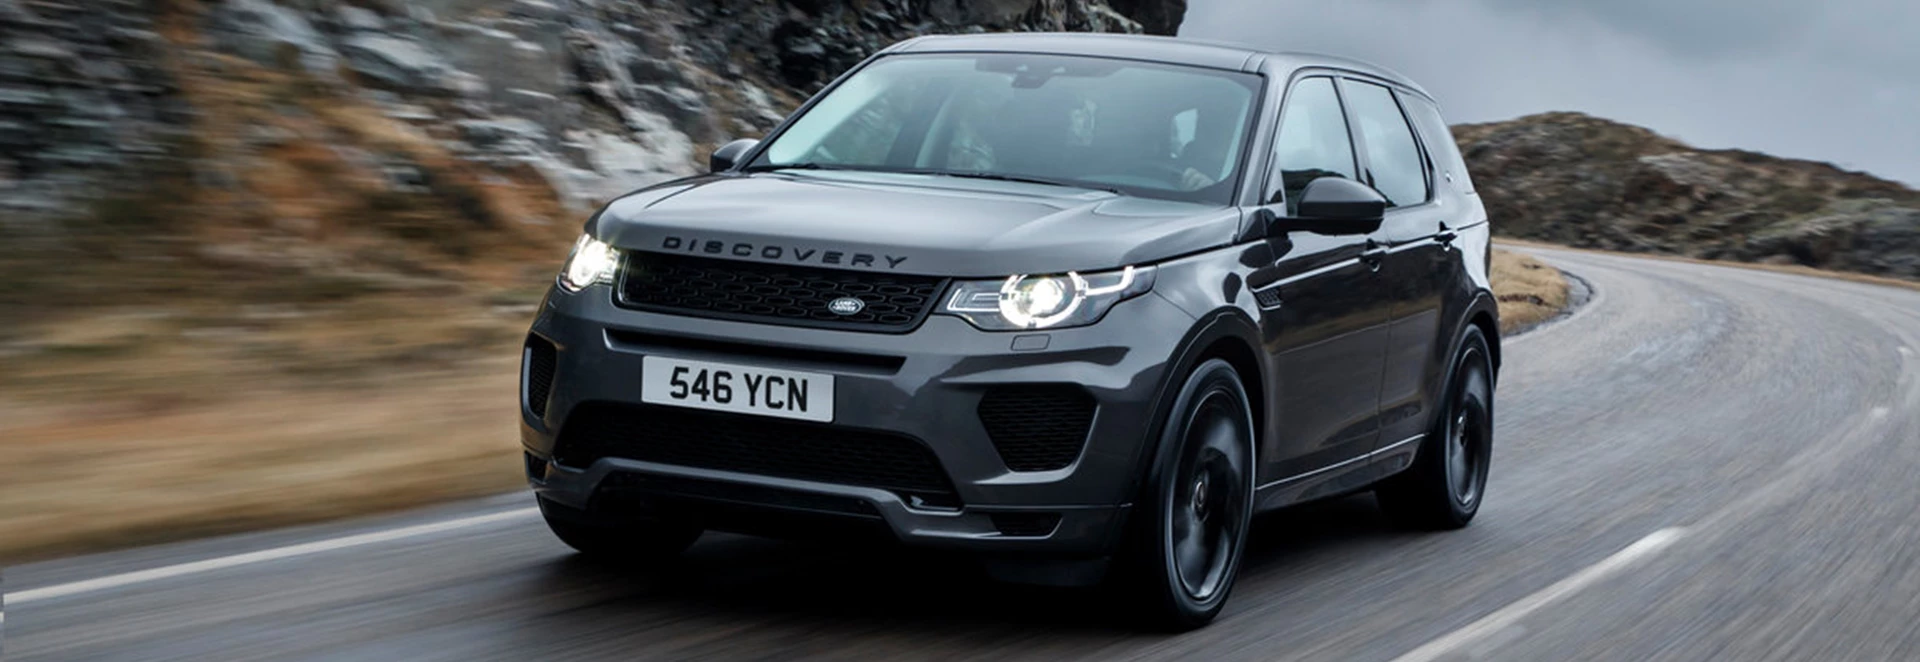 Land Rover Discovery Sport adds Ingenium engine